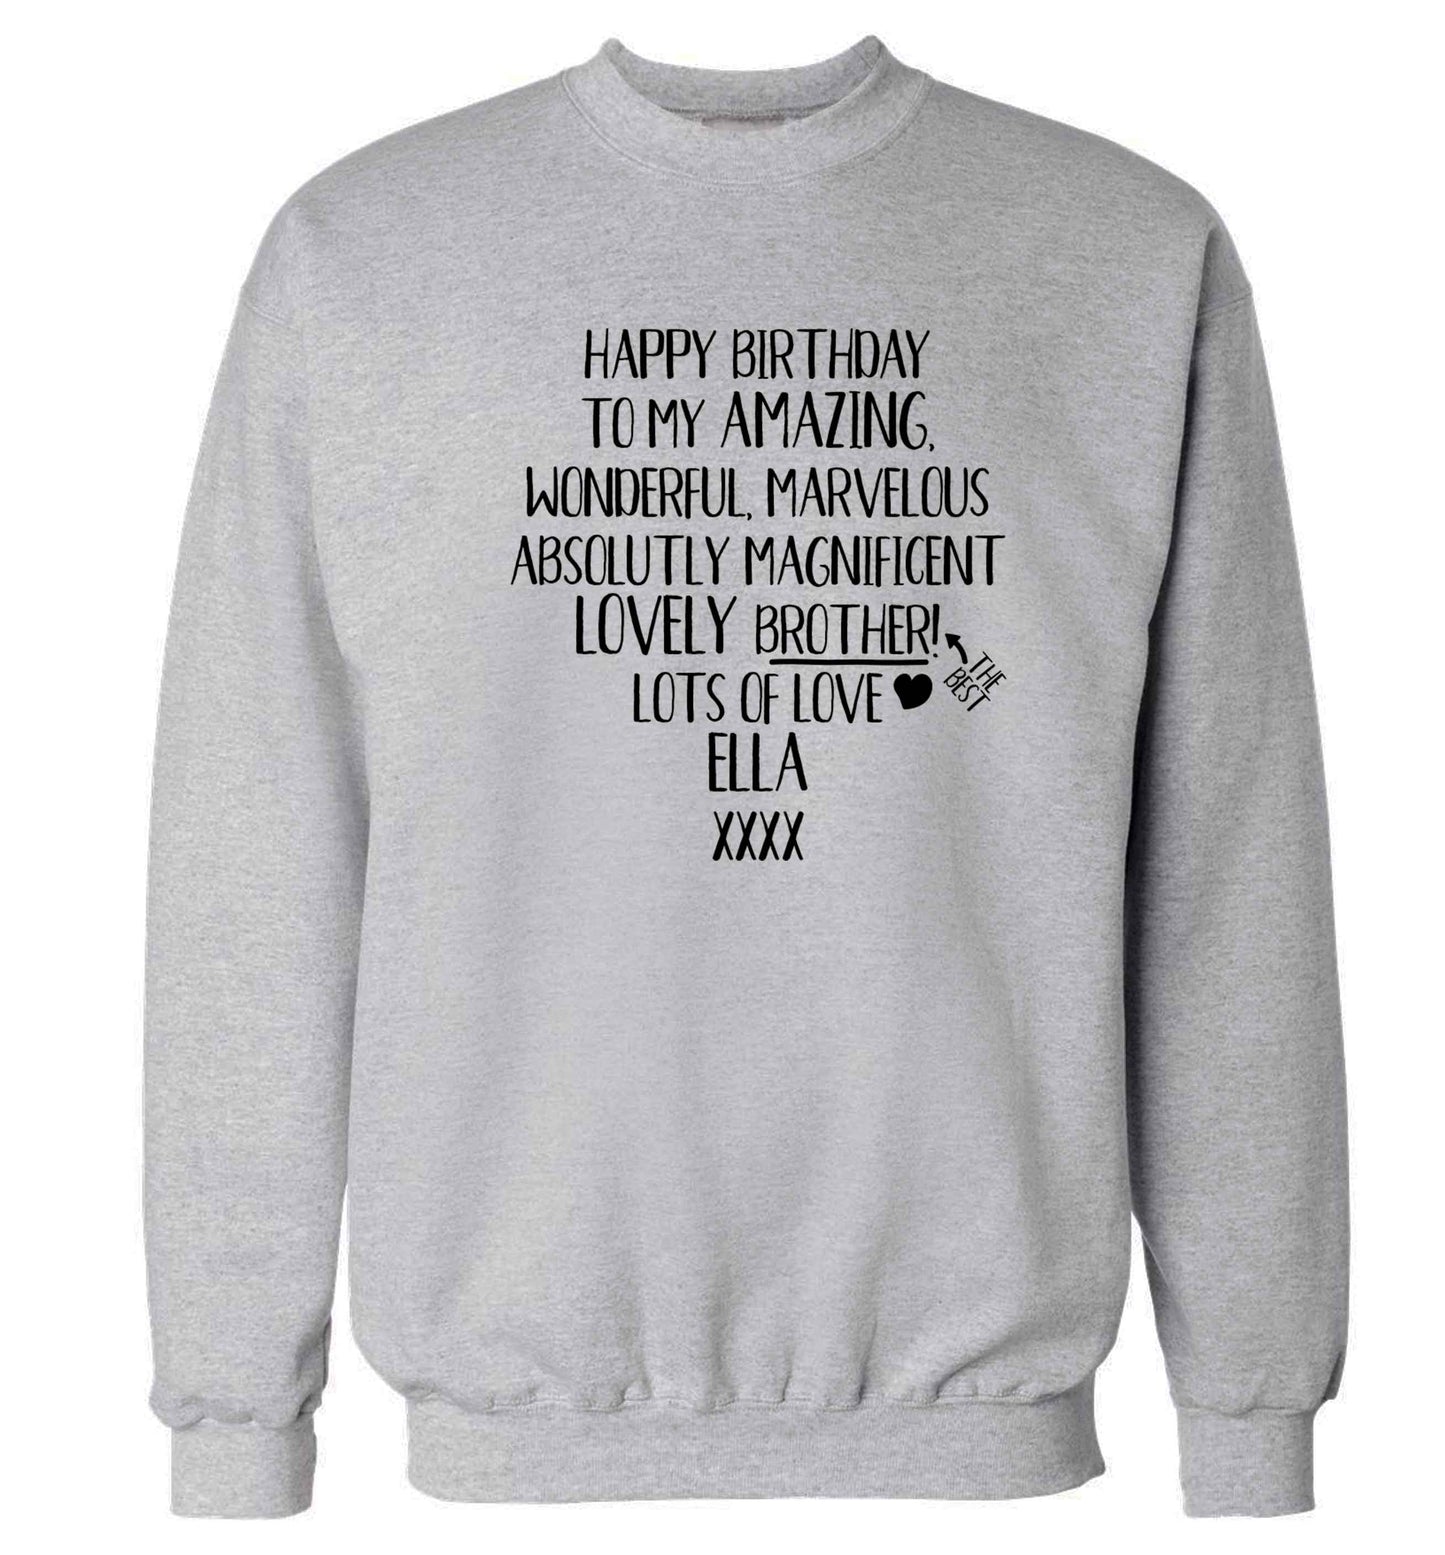 Personalised happy birthday to my amazing, wonderful, lovely brother Adult's unisex grey Sweater 2XL